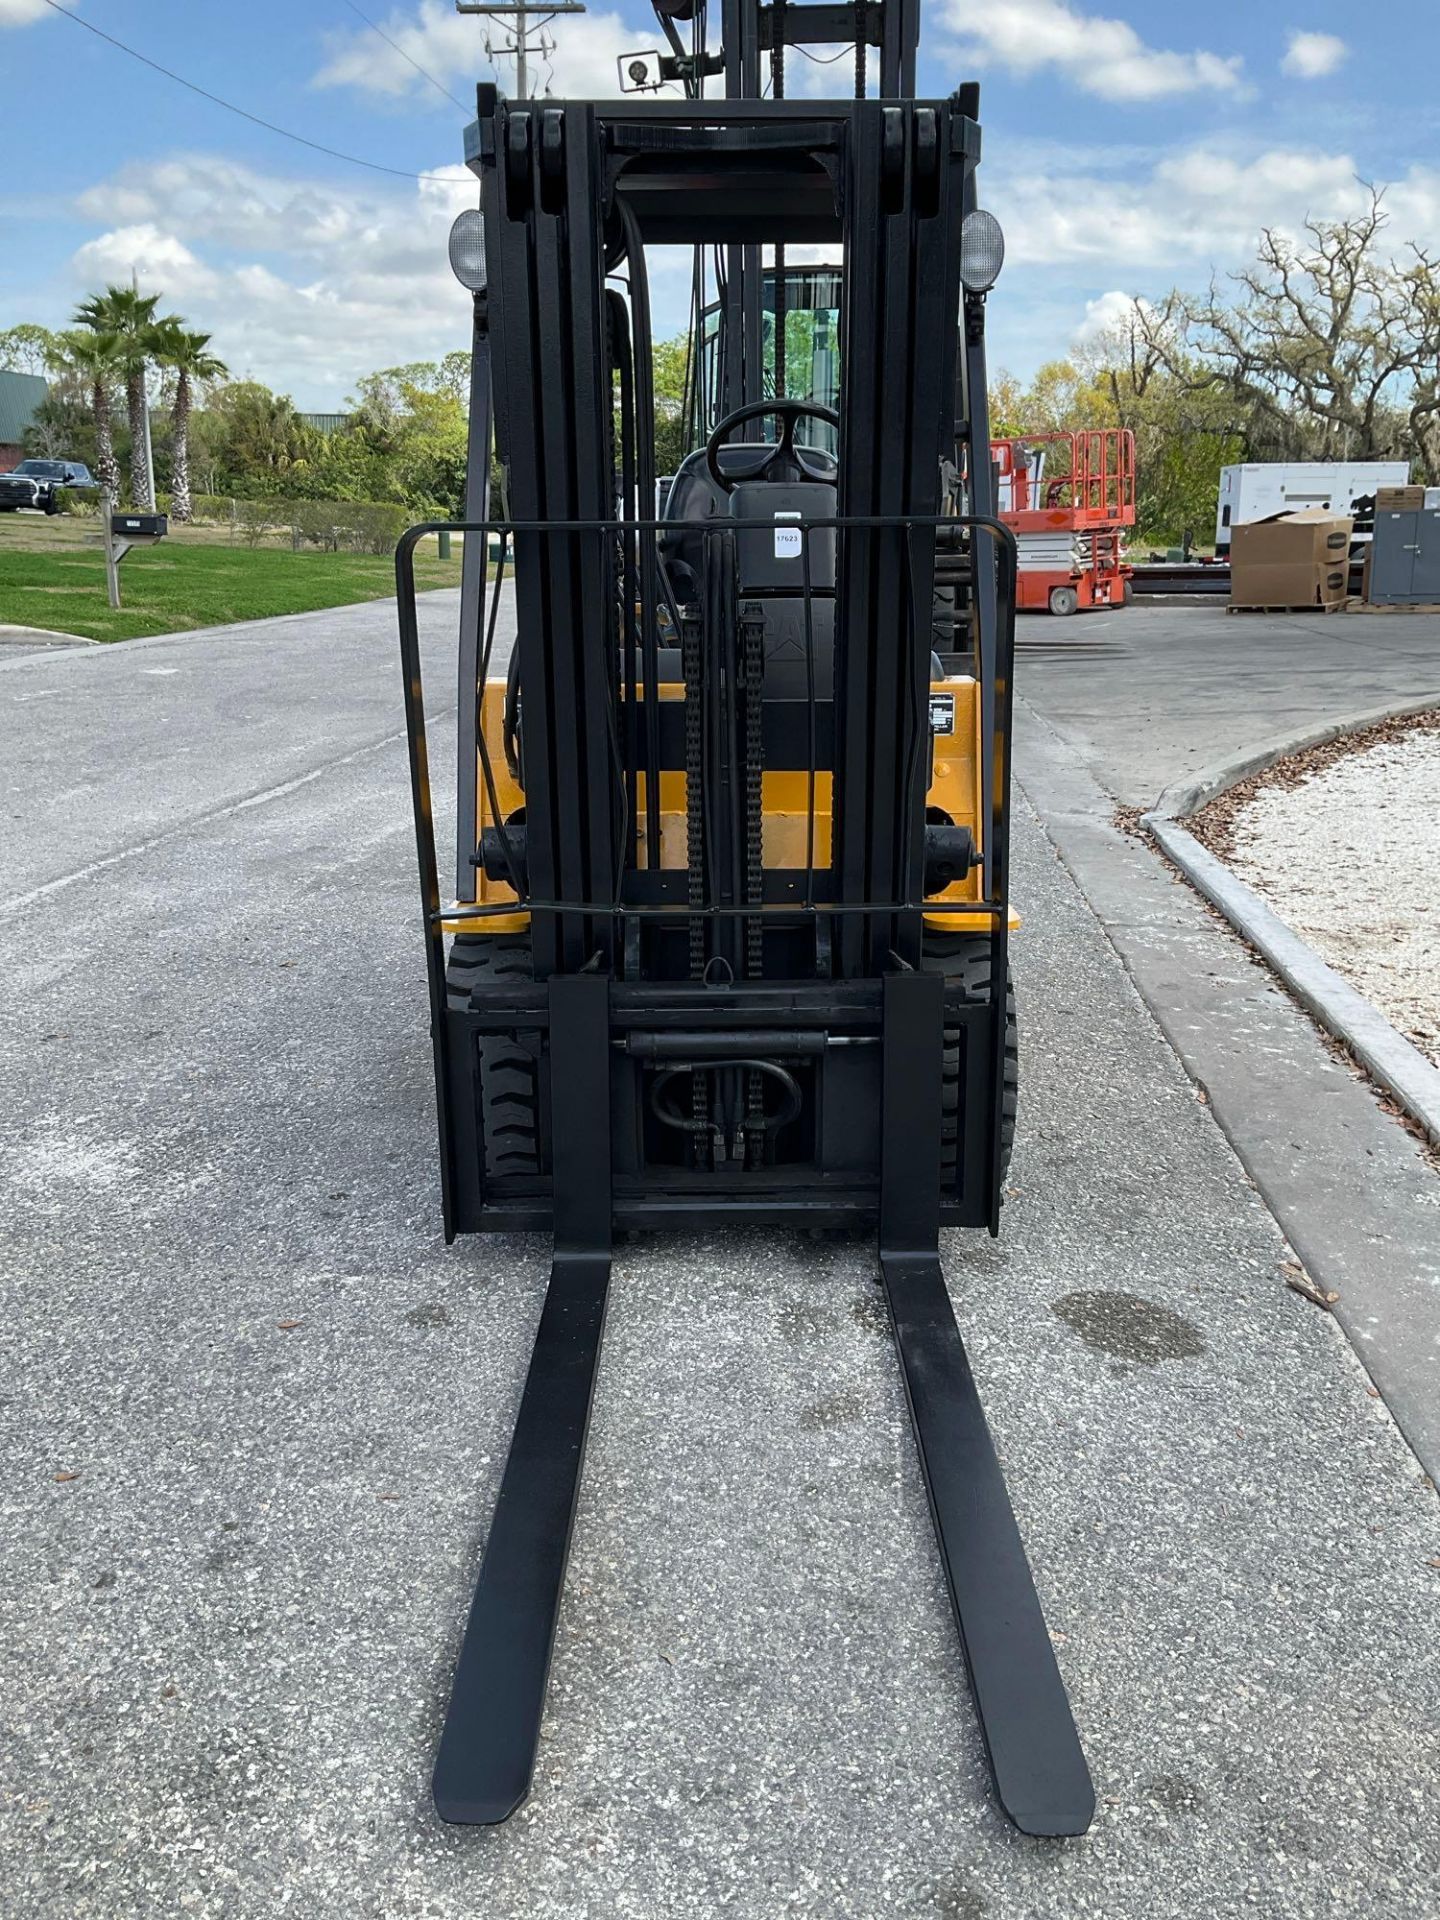 CATERPILLAR FORKLIFT MODEL GC20K, LP POWERED, APPROX MAX CAPACITY 4000LBS, APPROX MAX HEIGHT 160" - Image 8 of 12